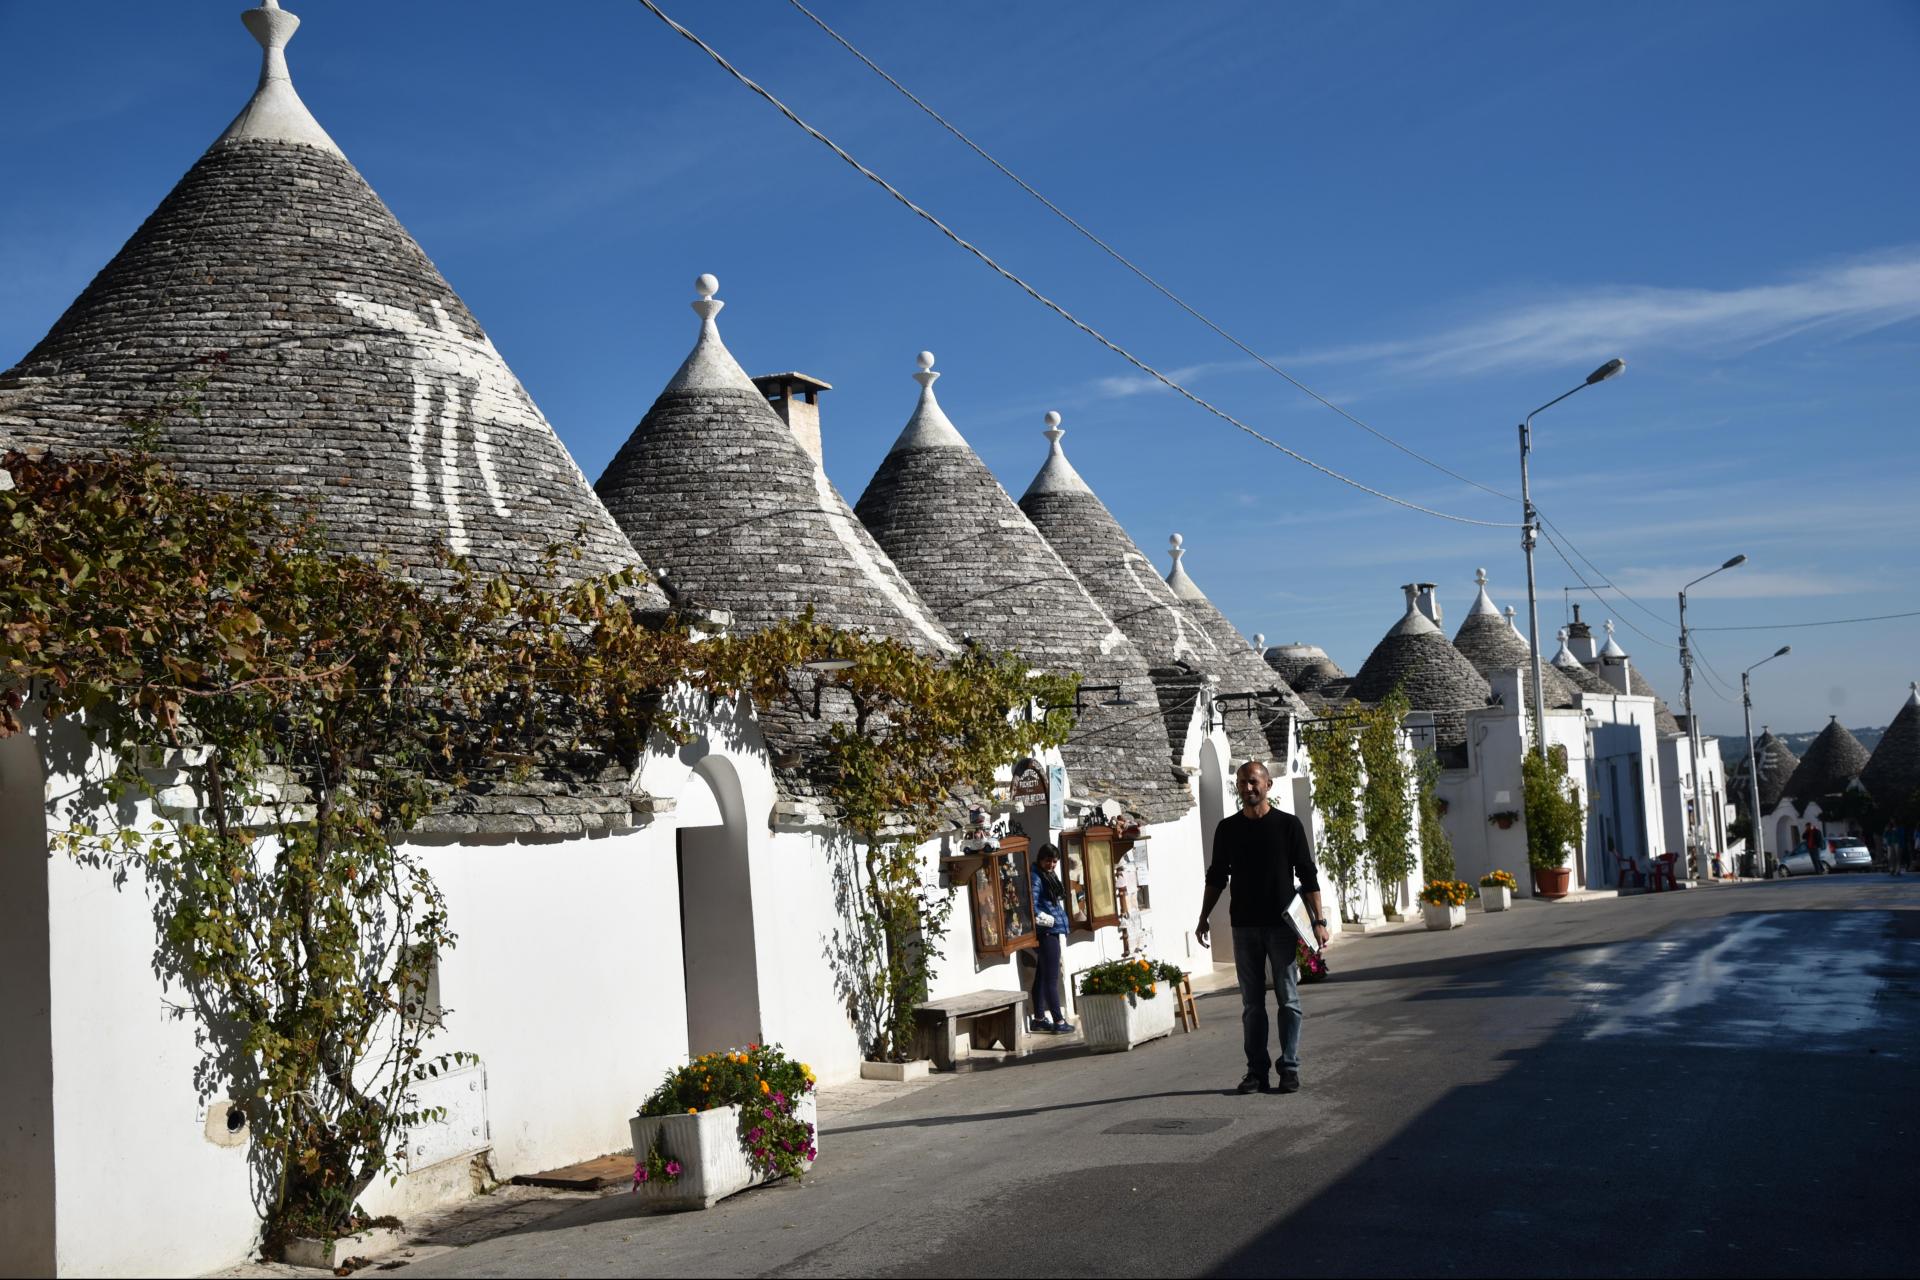 Self guided cycling tour through Alberobello with Pure Adventures.